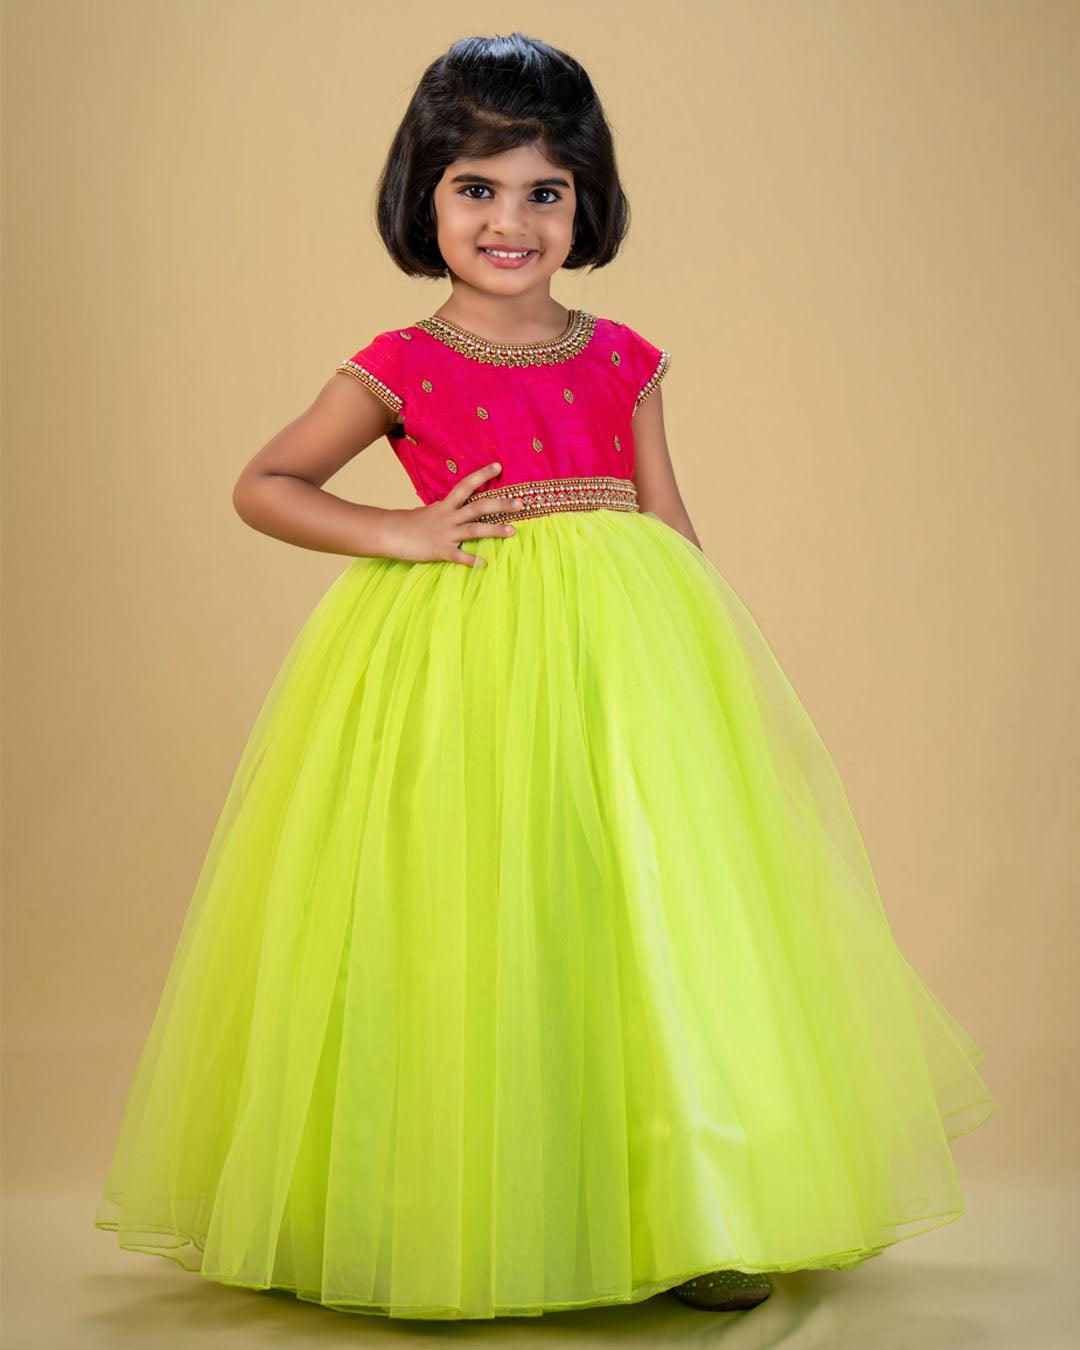 Lime Green & Pink Combo Partywear Hand Embroidery Long Gown
Material: Lime Green shade mono nylon softnet fabric is used for the bottom of the skirt. Rany pink blended silk fabric with heavily embroidery handwork on the neck